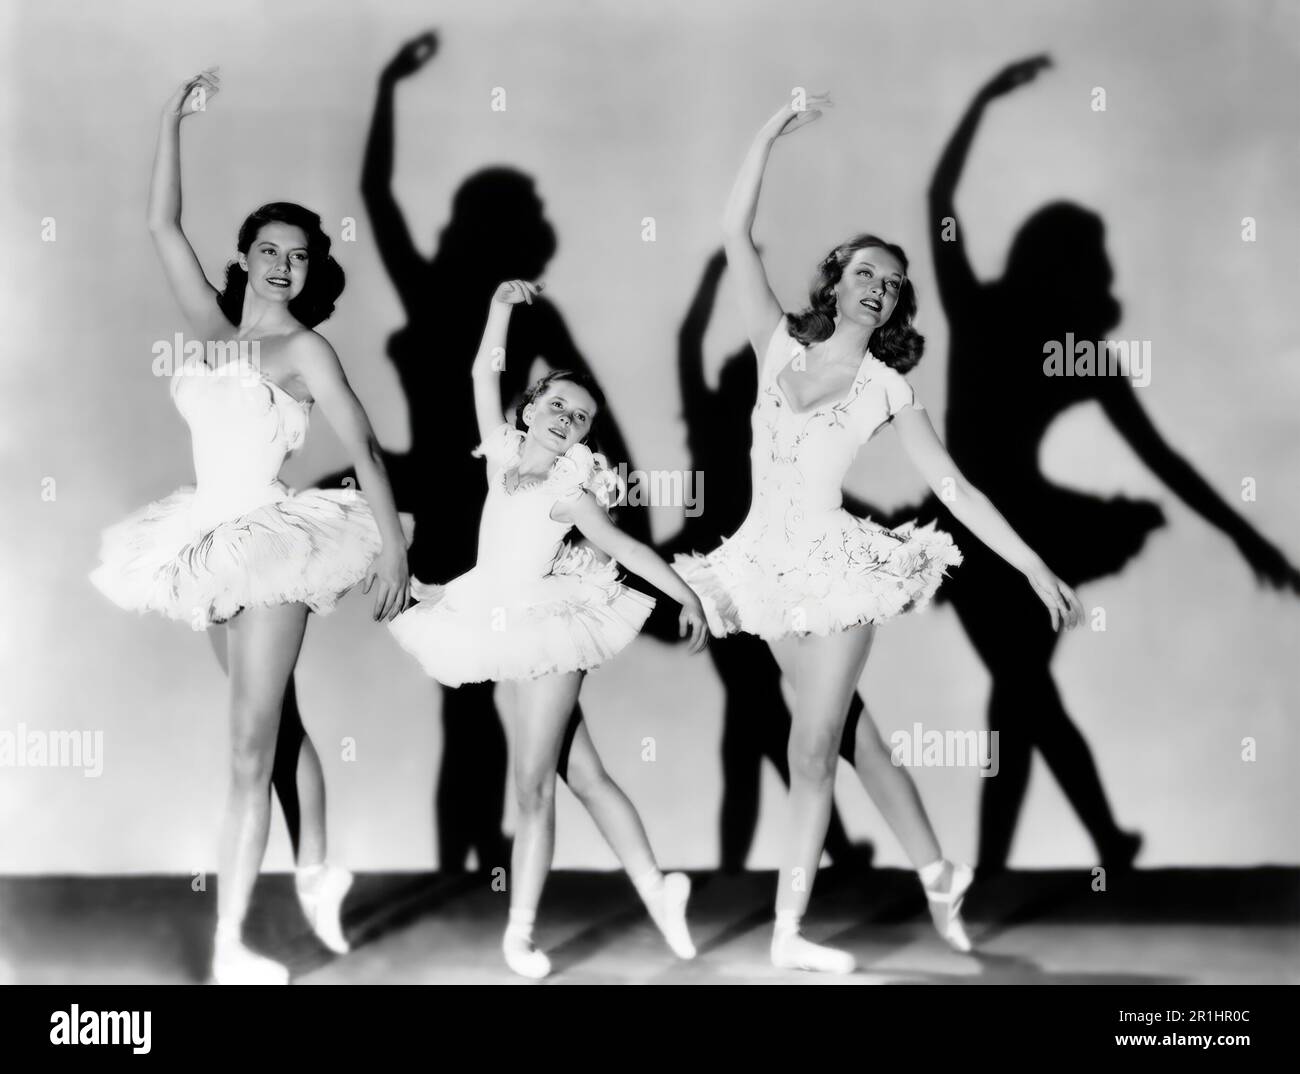 CYD CHARISSE, MARGARET O'BRIEN and KARIN BOOTH in THE UNFINISHED DANCE (1947), directed by HENRY KOSTER. Credit: M.G.M. / Album Stock Photo